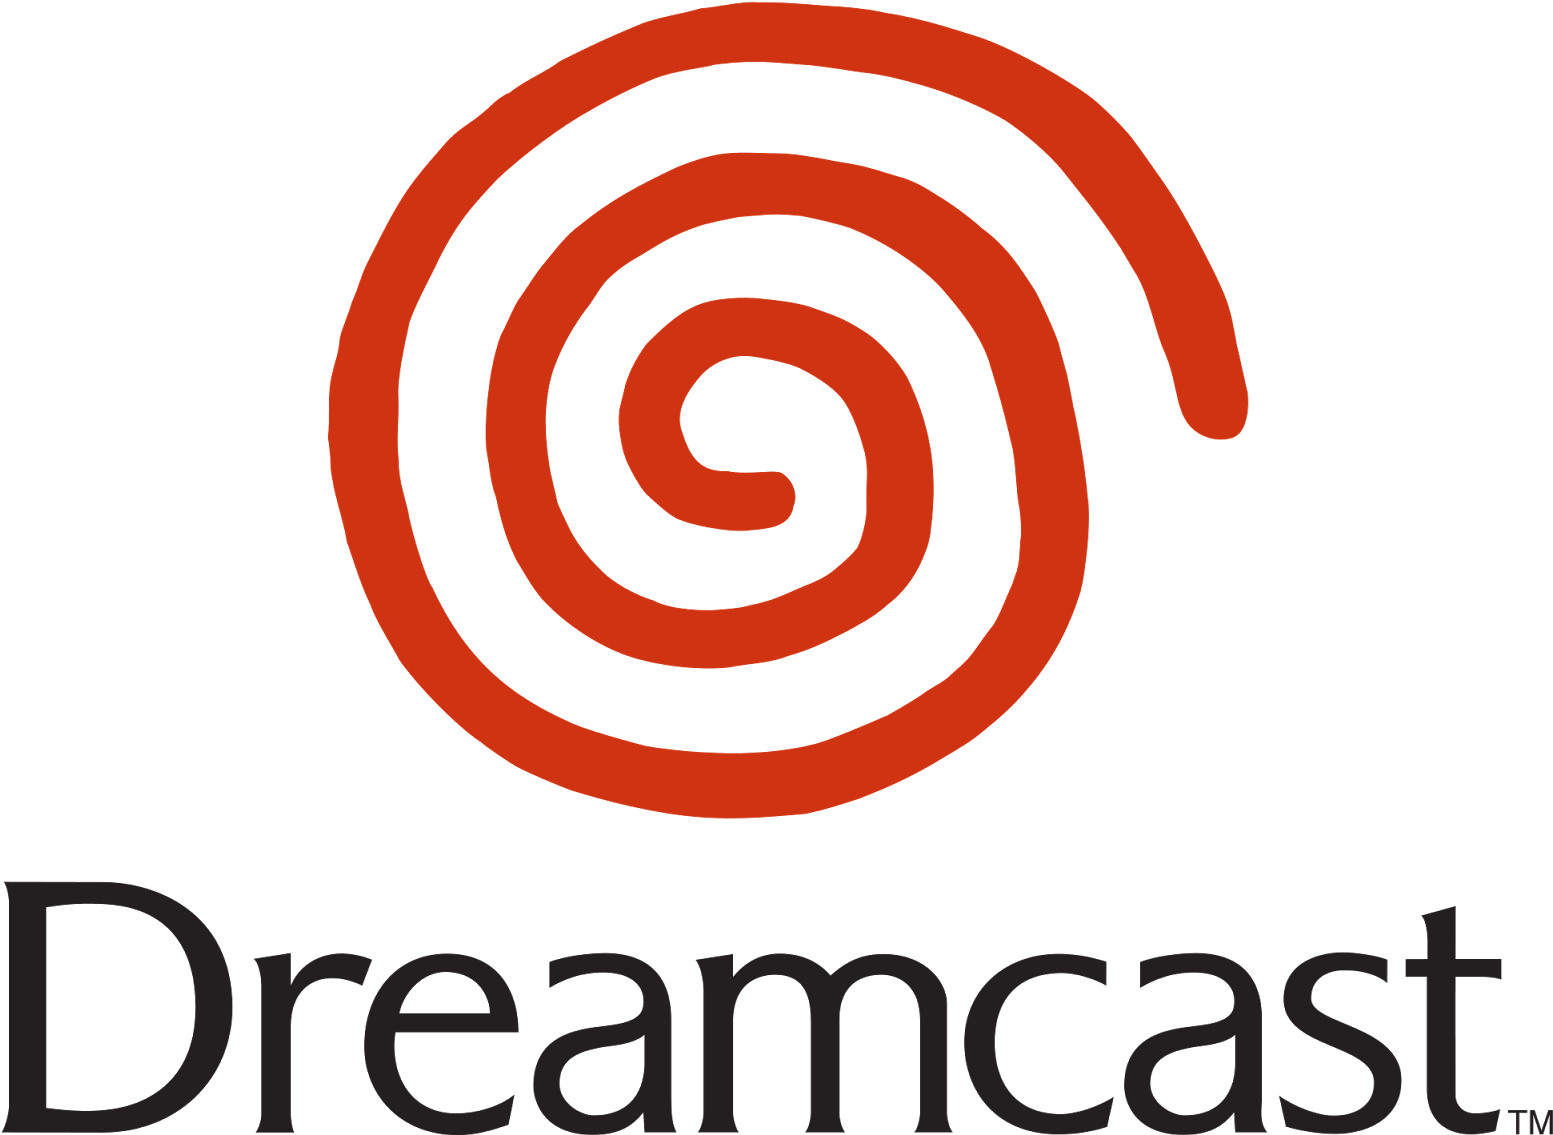 I Keep The Nostalgia Train Rolling With The Sega Dreamcast - Sega Dreamcast Swirl (1600x1178), Png Download